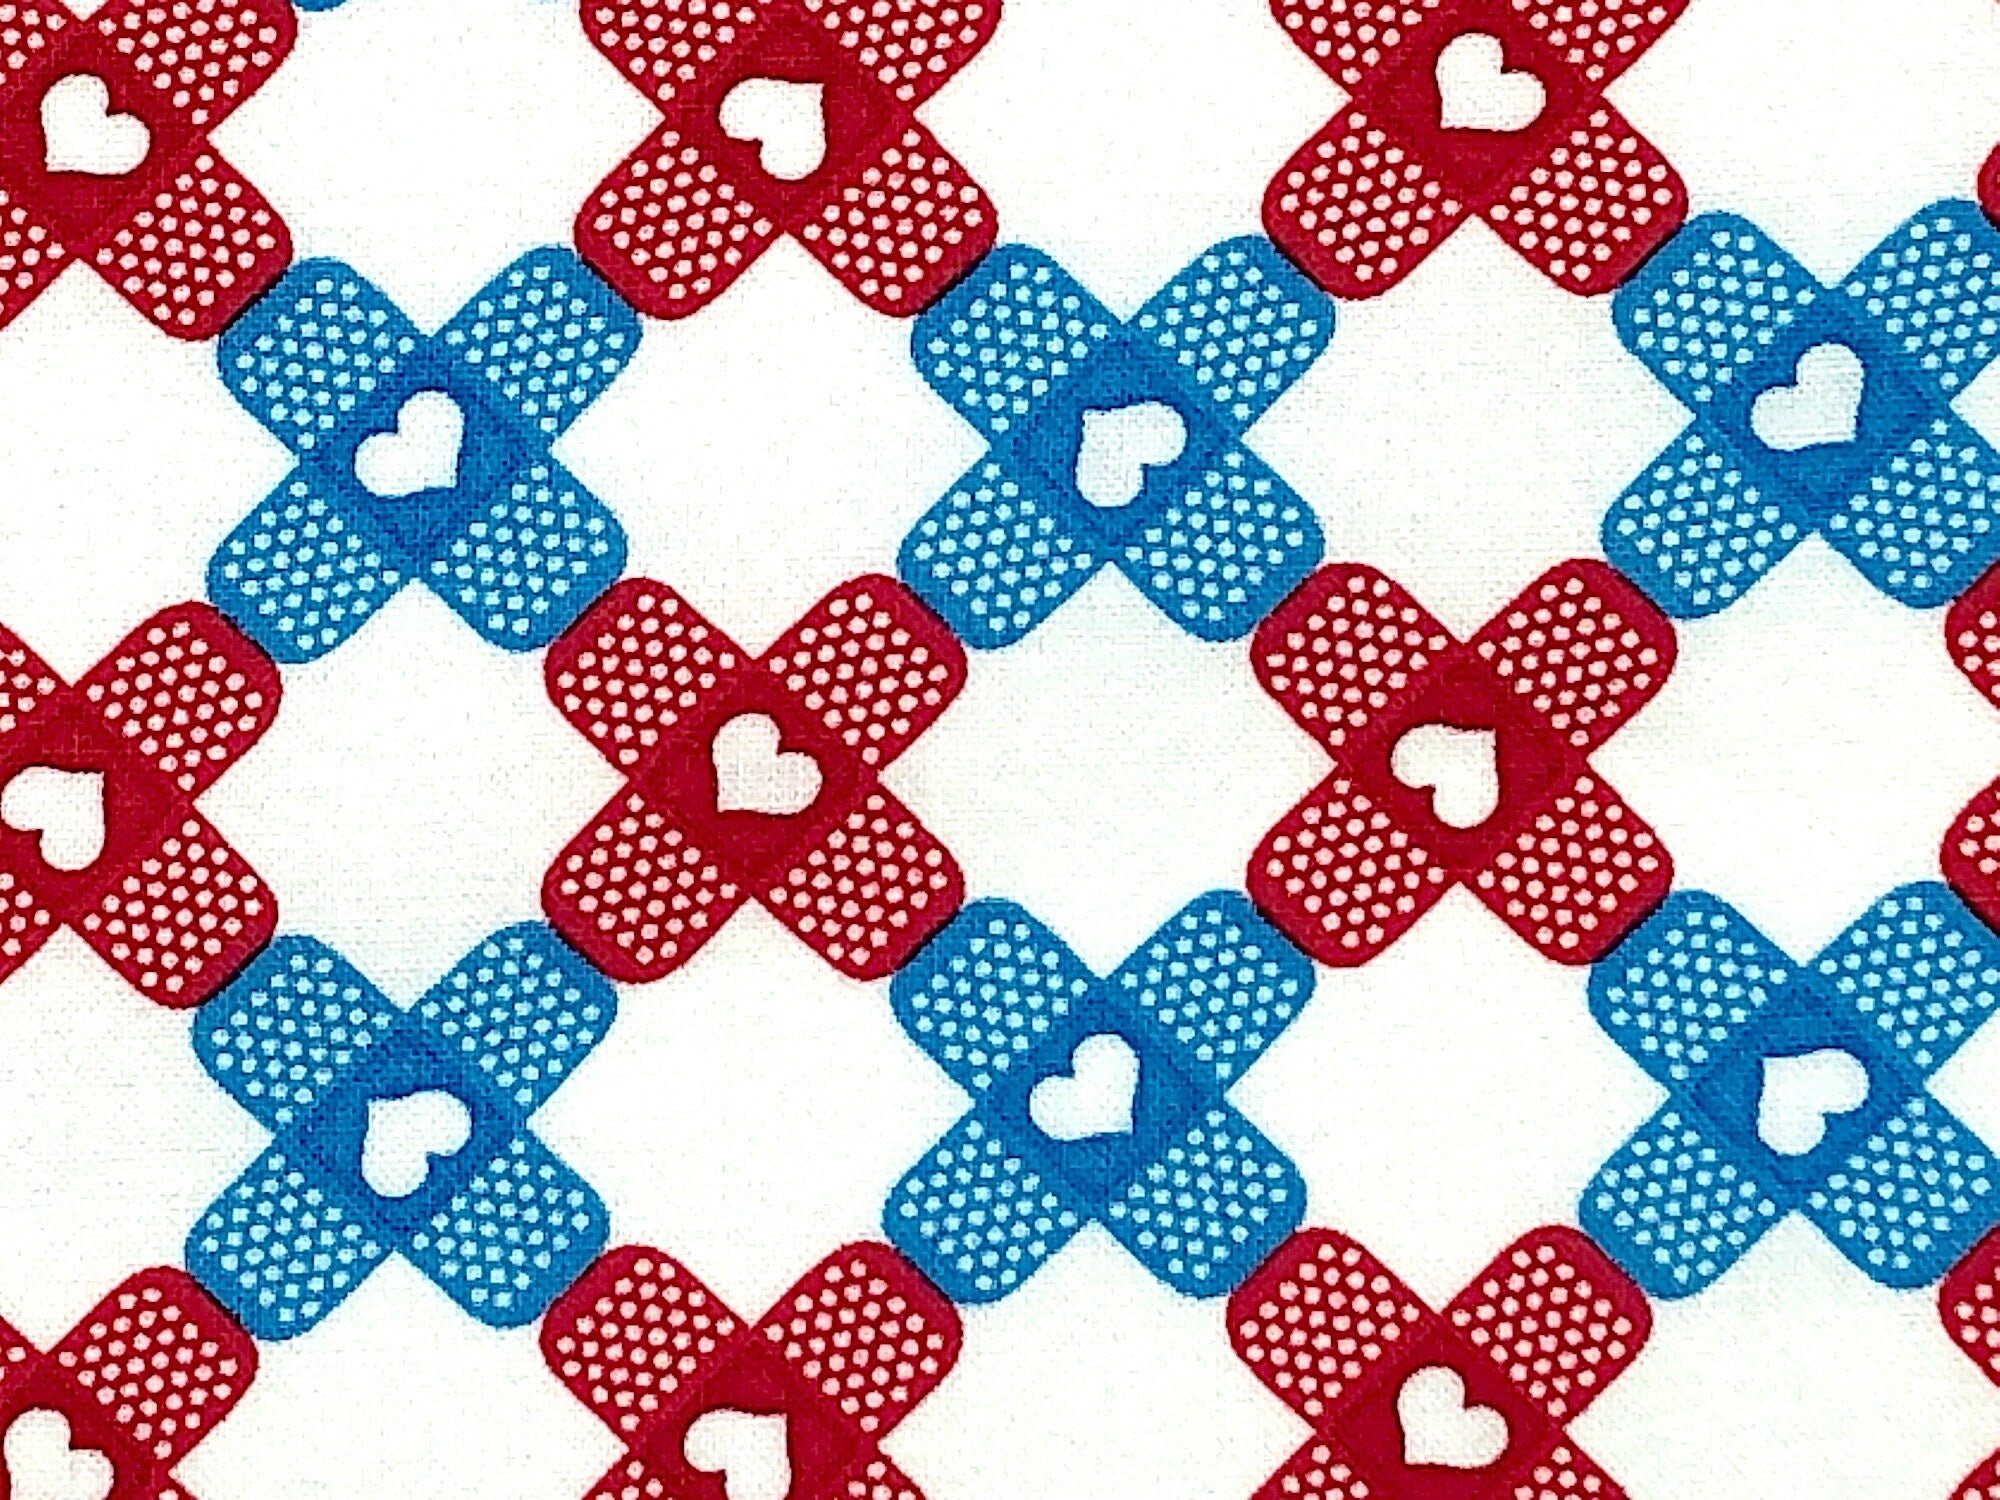 Close up of blue and red band aids on a white background.